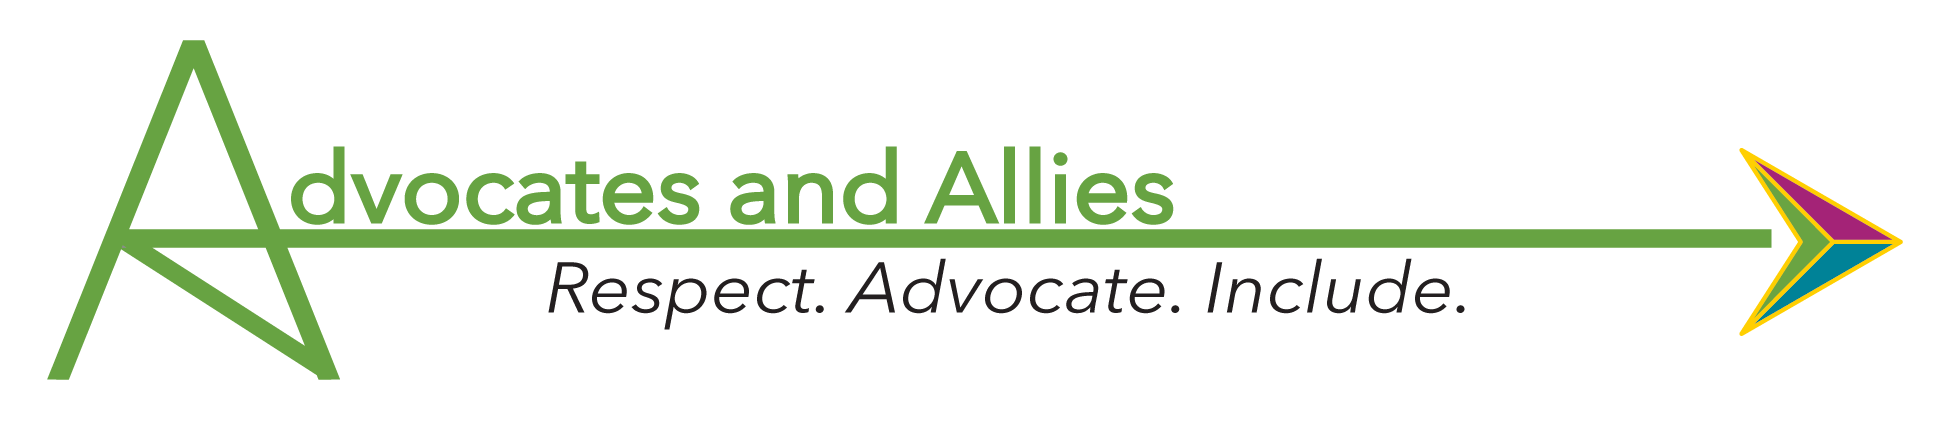 Advocates and Allies: Respect, advocate, include